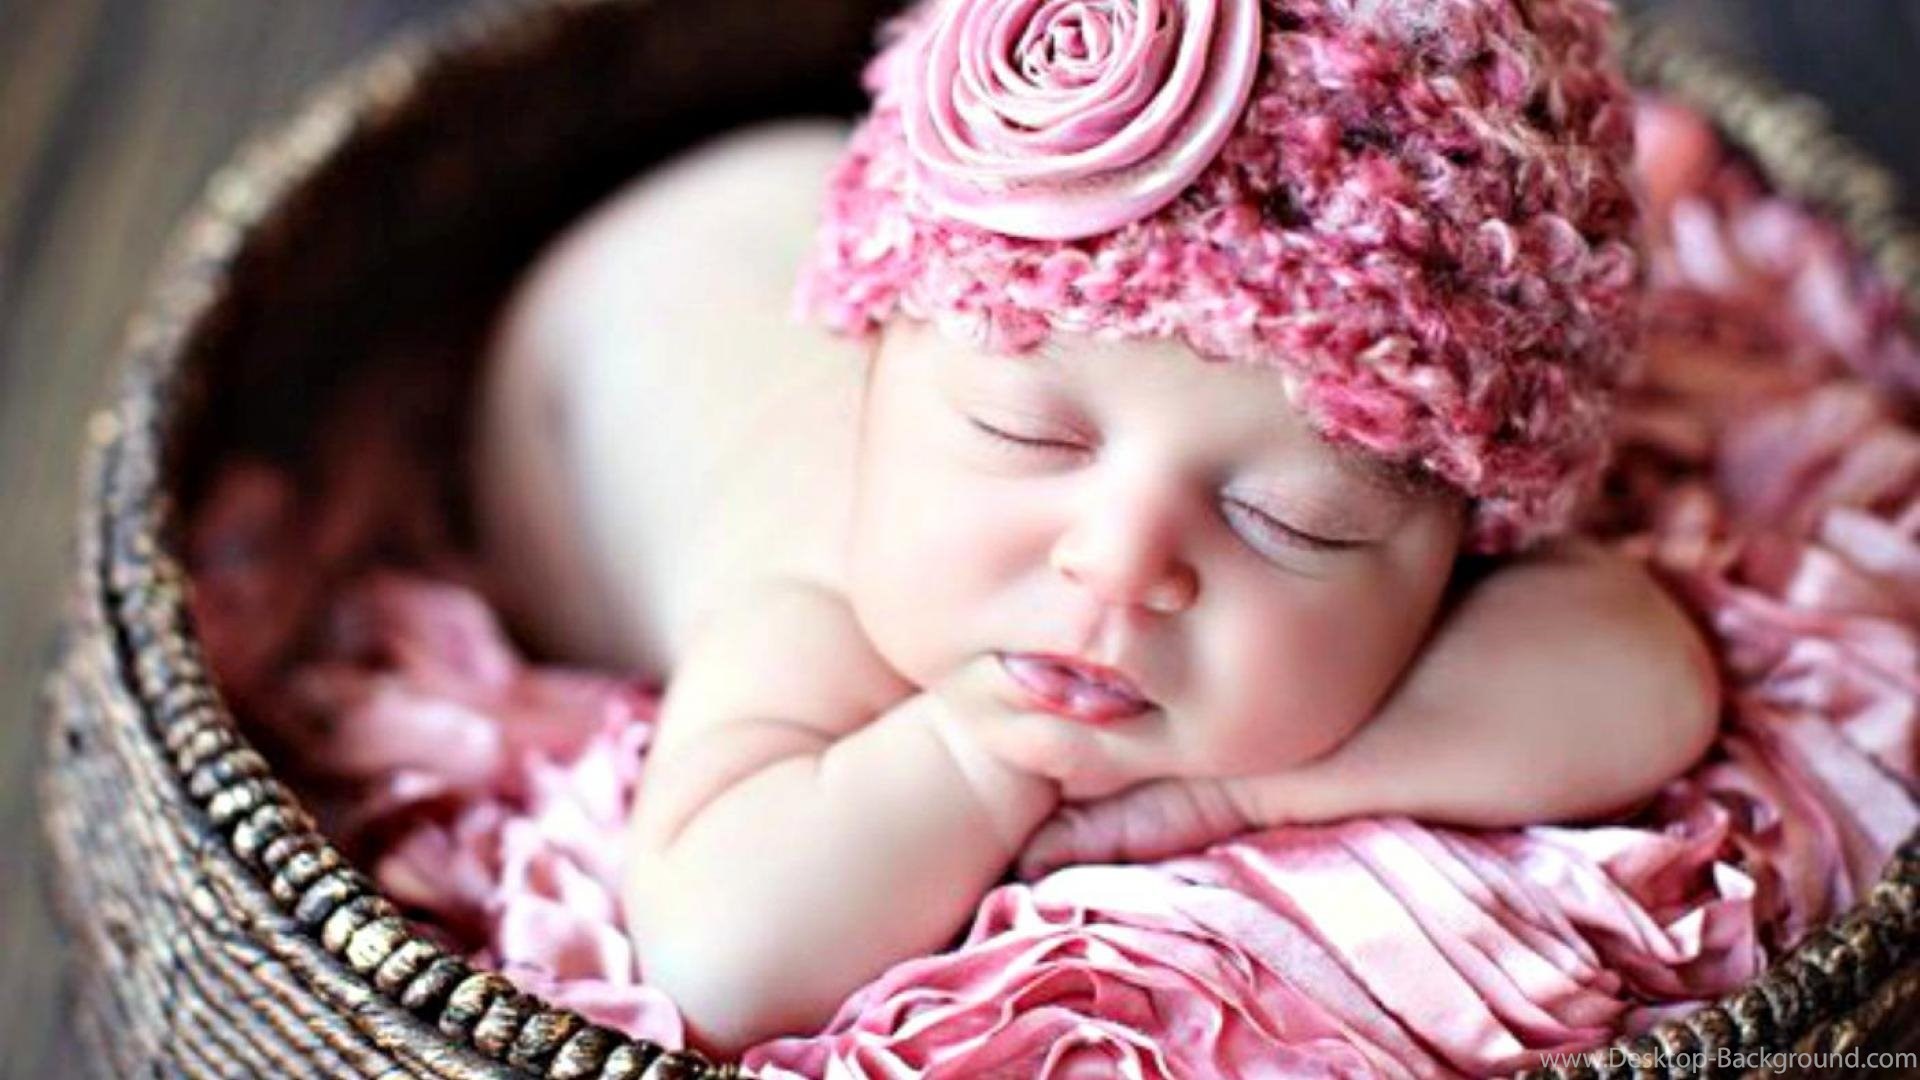 Popular - Cute Baby Hd Images Free Download , HD Wallpaper & Backgrounds